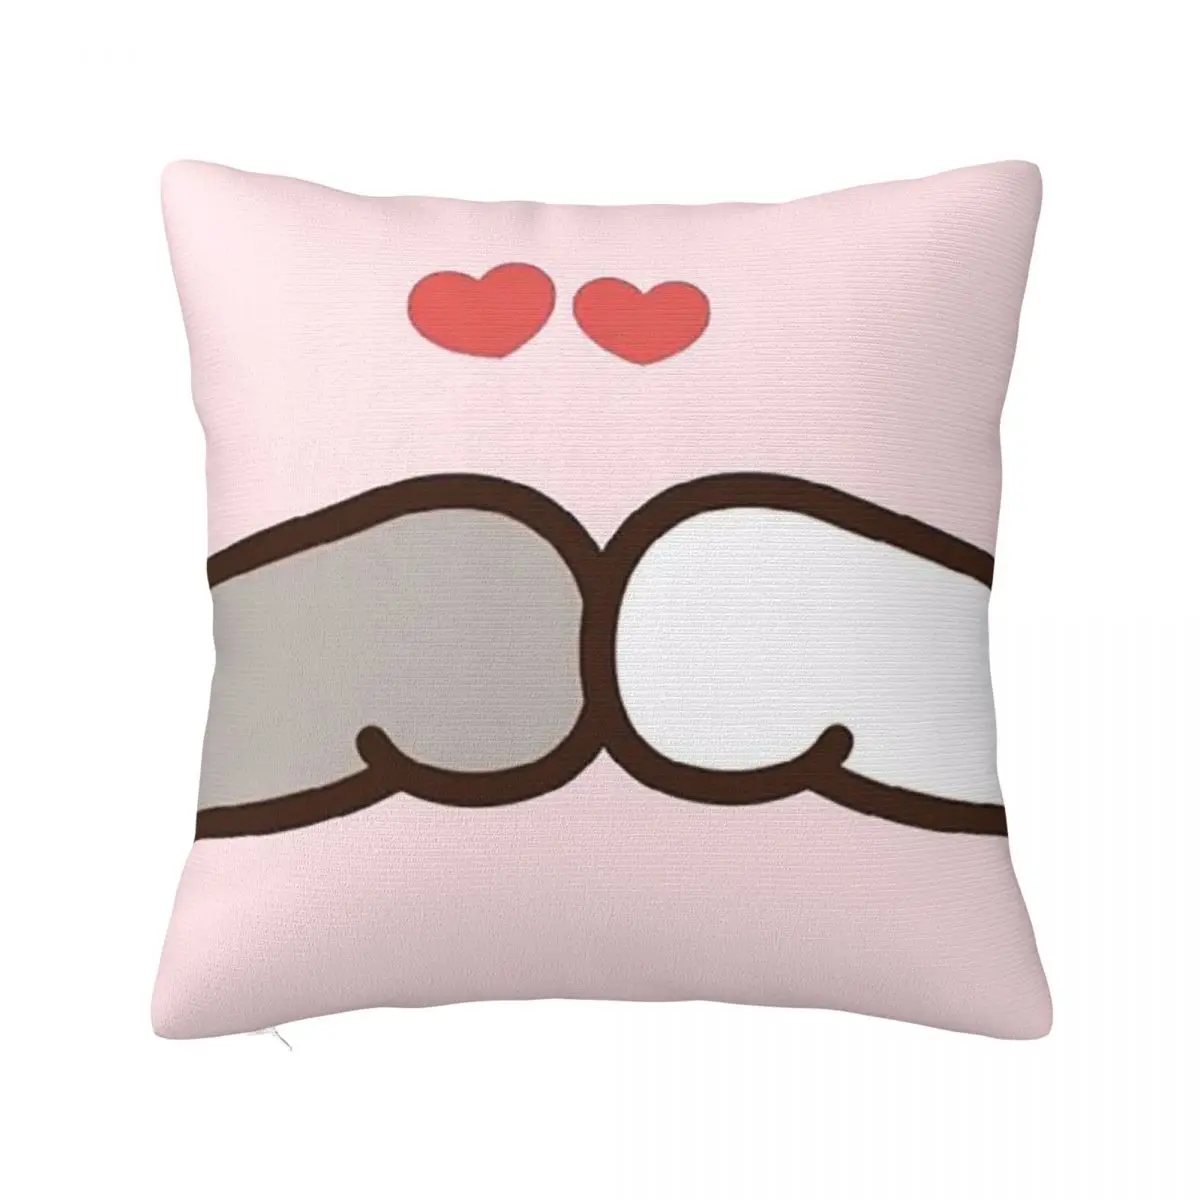 

Peach And Goma Mochi Cat Pillowcase Printing Polyester Cushion Cover Decorative Throw Pillow Case Cover Seat Square 45X45cm